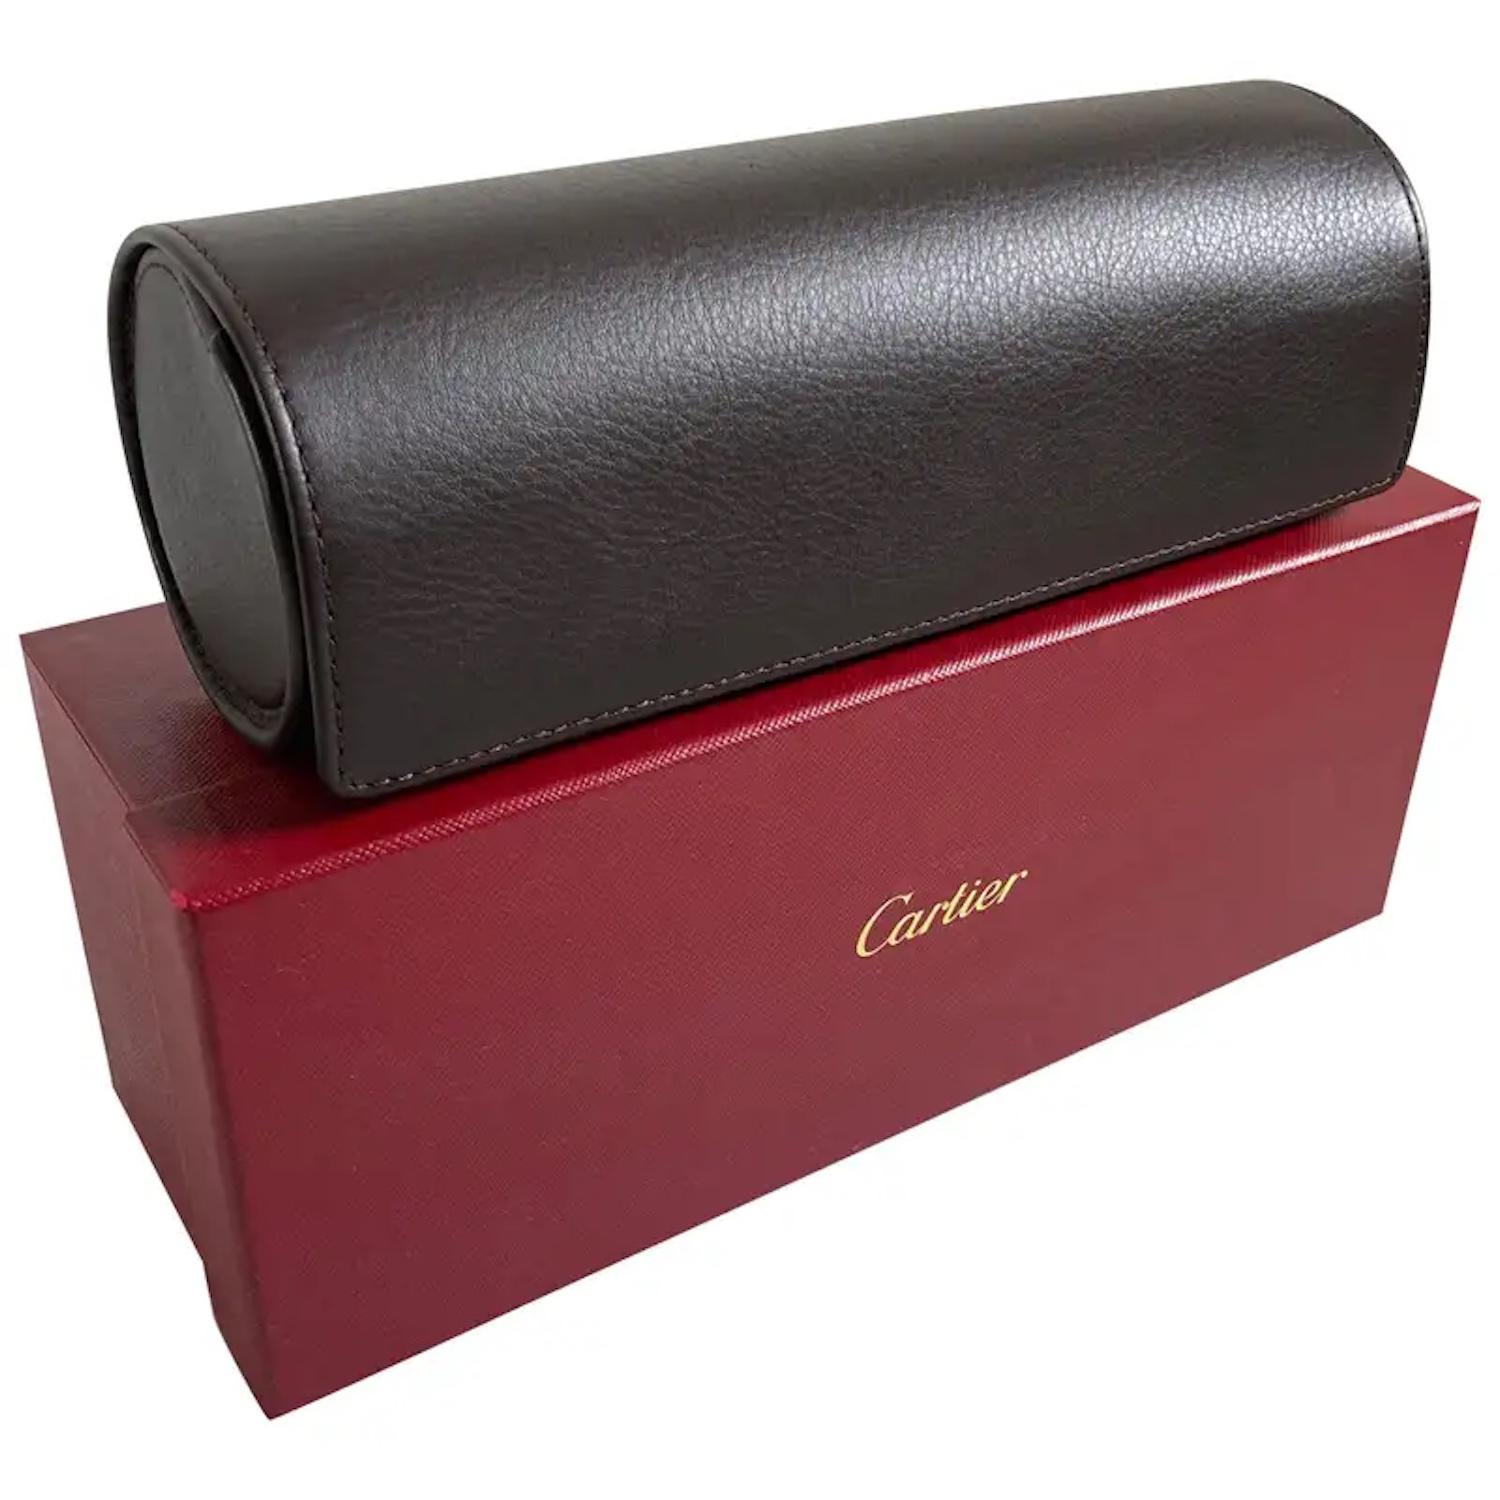 Cartier Paris brown leather gold hardware roll travel watch storage case roll bag.
Velvet lining great to store your love bracelet or Cartier or Hermès watches.
Cartier travel watch case.
Limited Edition Cartier Paris brown leather roll watch